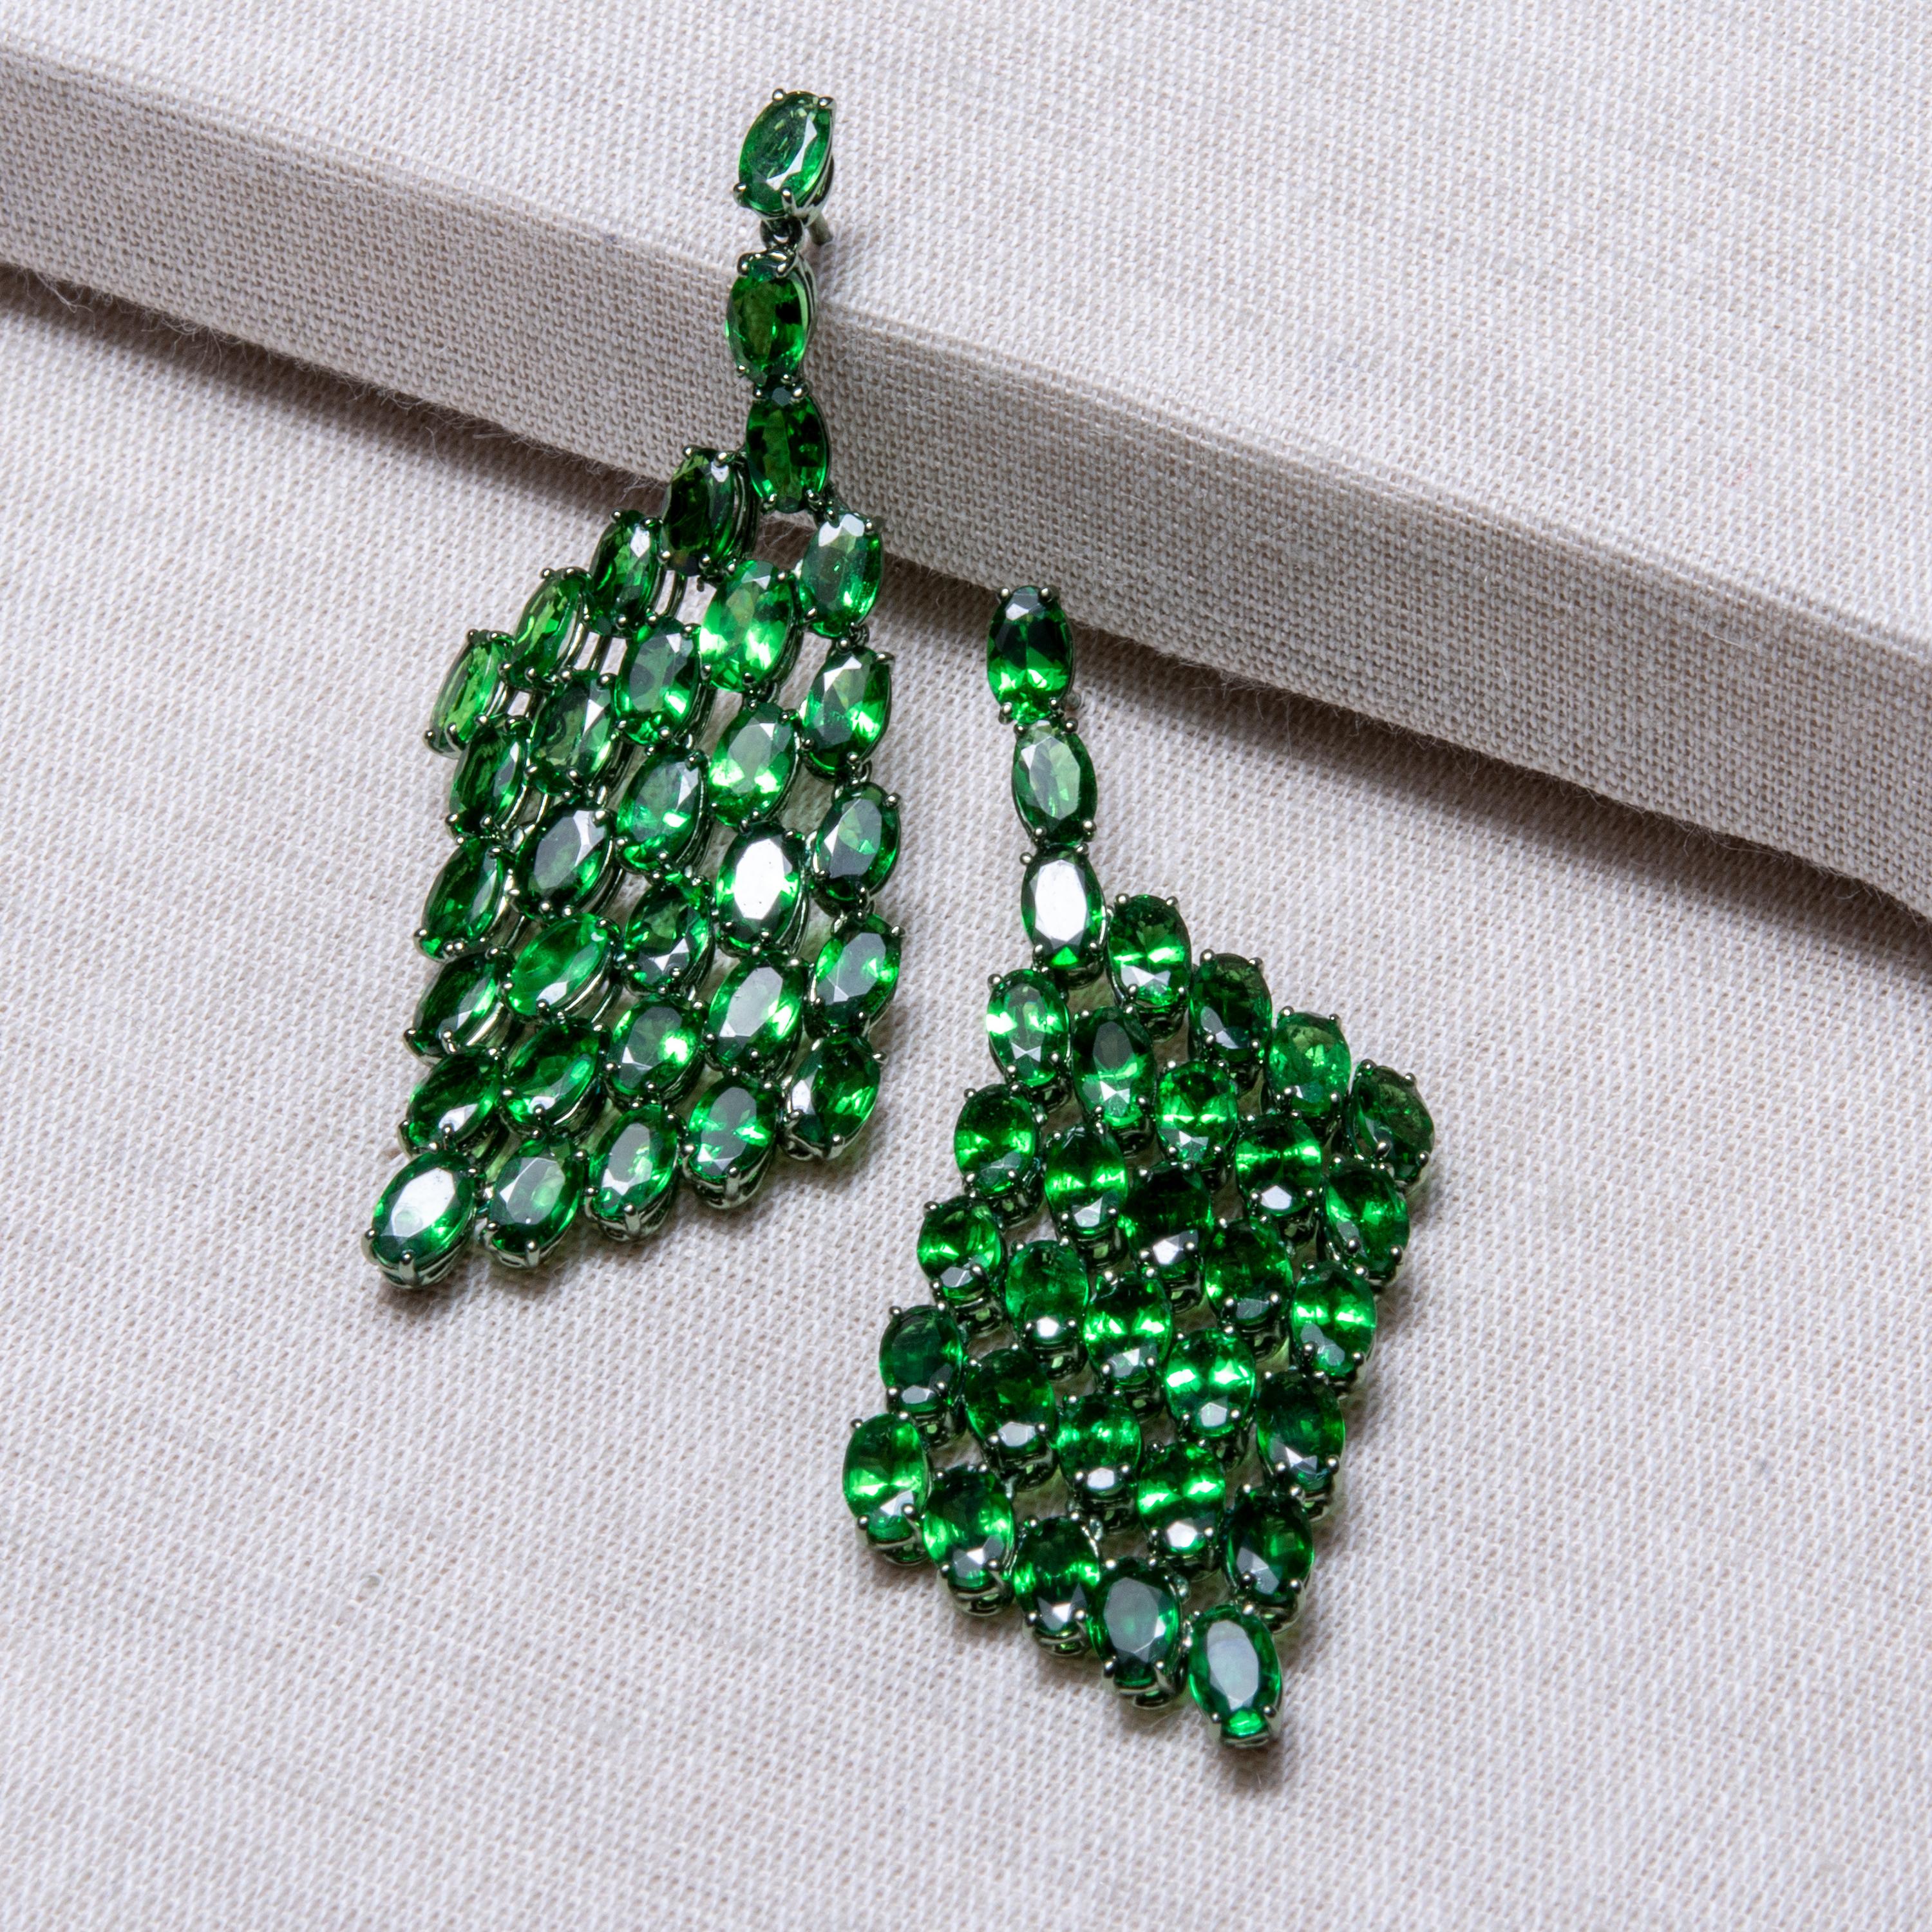 Collection: The Gem Made Me Do It

Title: “The Tsavorite Dream” Earrings

These 64 tsavorites wanted to stay together holding hands and hanging loose so we weaved them together to make a Tsavorite cloth dangle earrings. When you hold this pair of